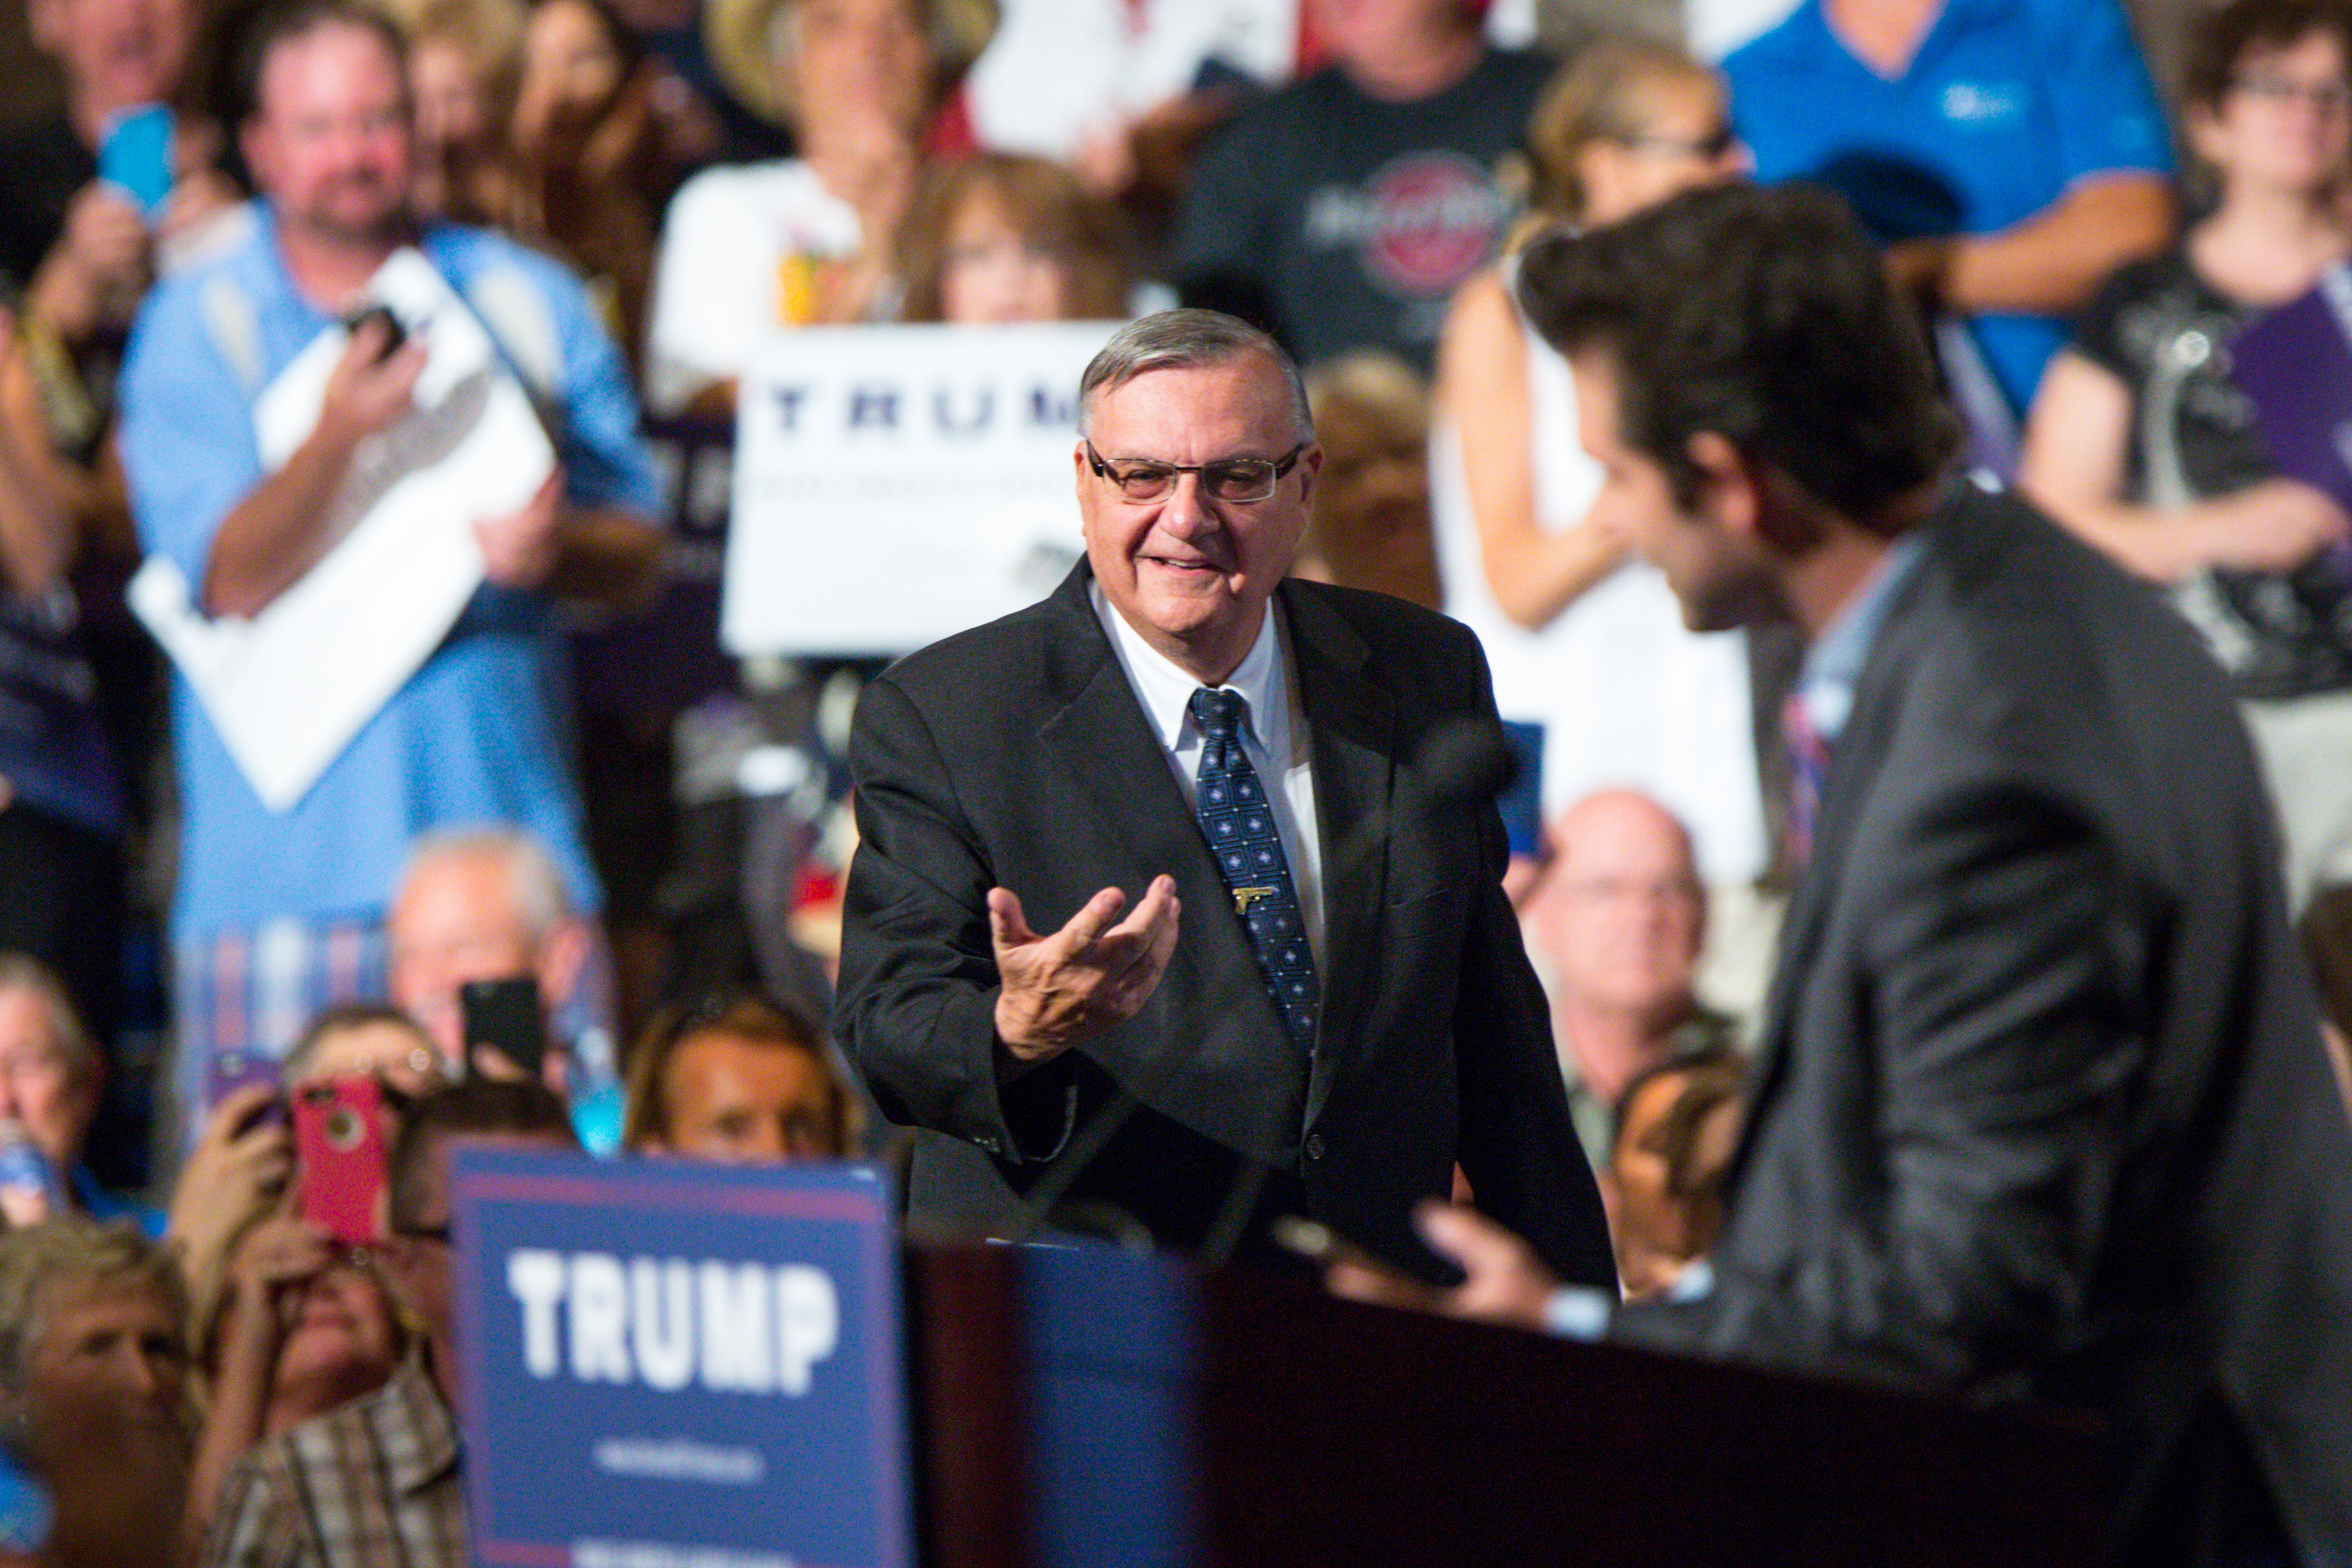 Maricopa County Sheriff Joe Arpaio takes the stage to introduce Republican presidential candidate Donald Trump at a political rally at the Phoenix Convention Center on July 11, 2015 in Phoenix, Arizona. (Charlie Leight—Getty Images)